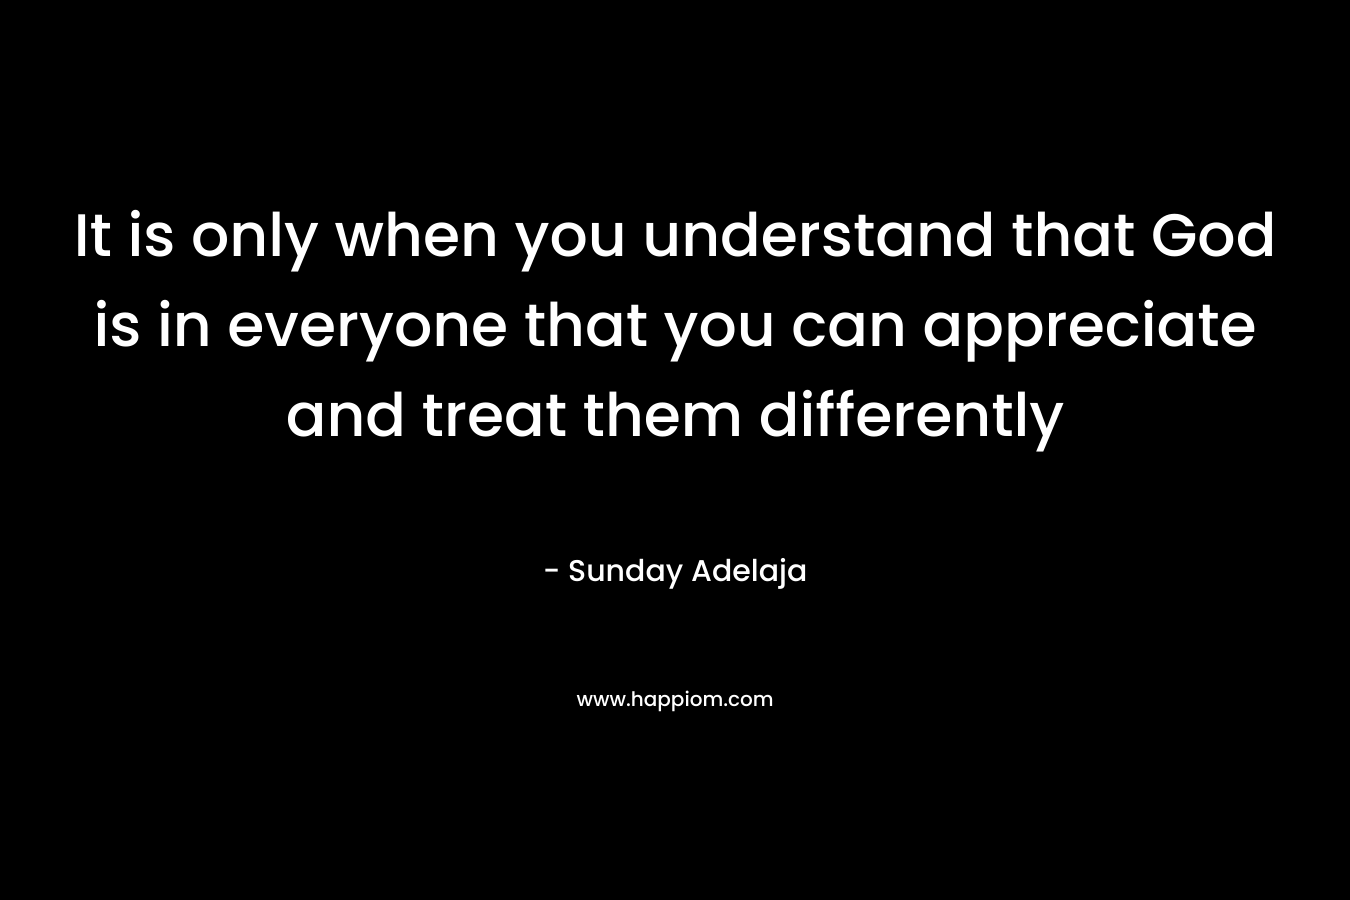 It is only when you understand that God is in everyone that you can appreciate and treat them differently